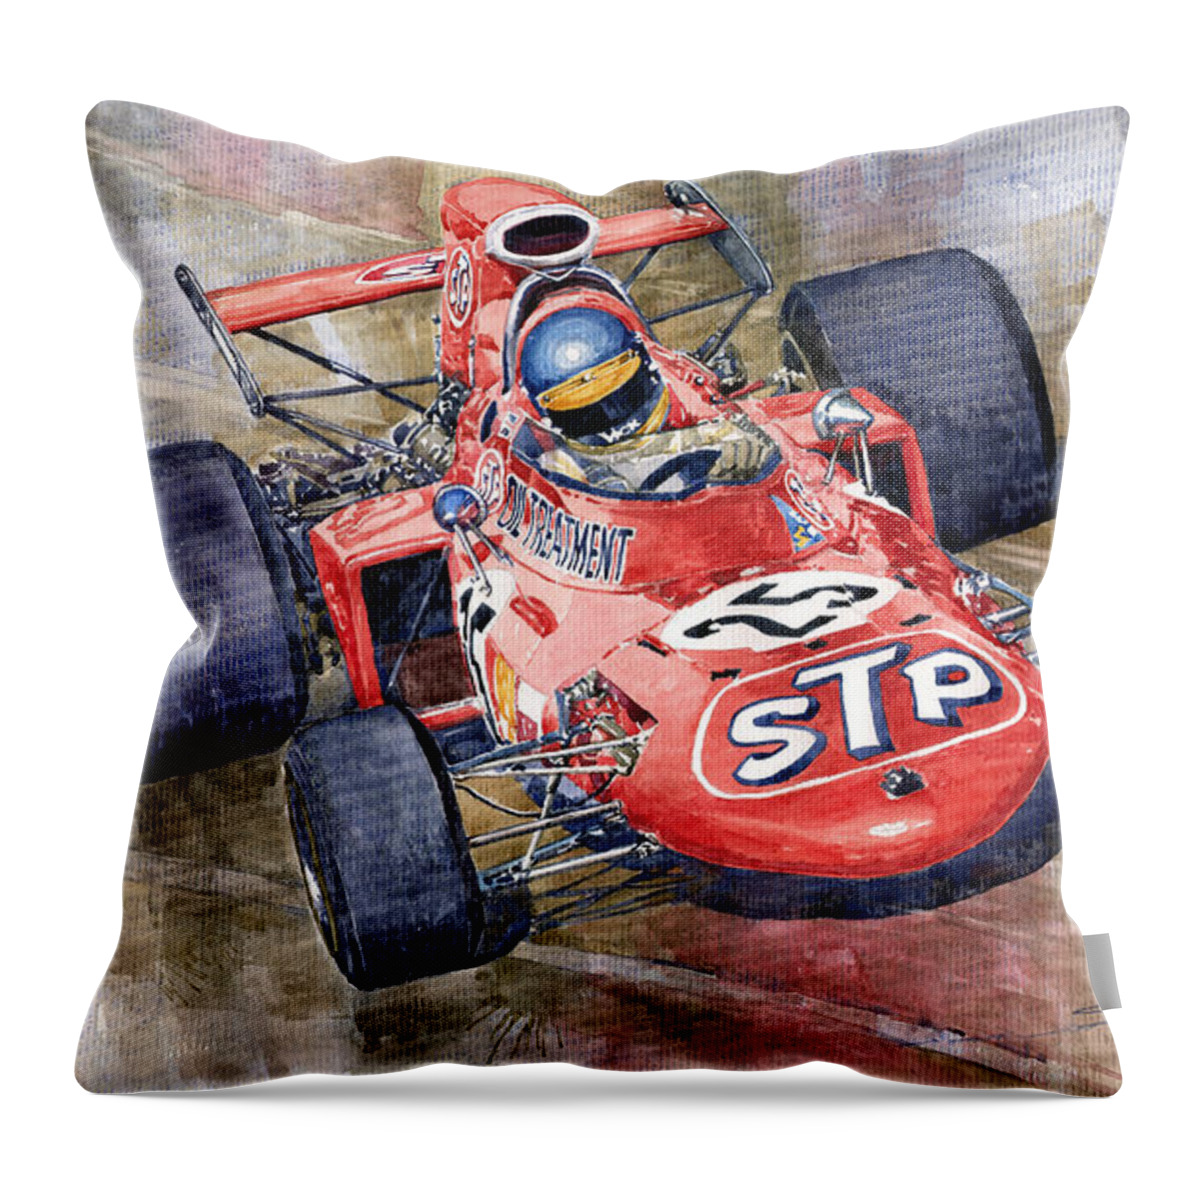 Watercolor Throw Pillow featuring the painting March 711 Ford Ronnie Peterson GP Italia 1971 by Yuriy Shevchuk